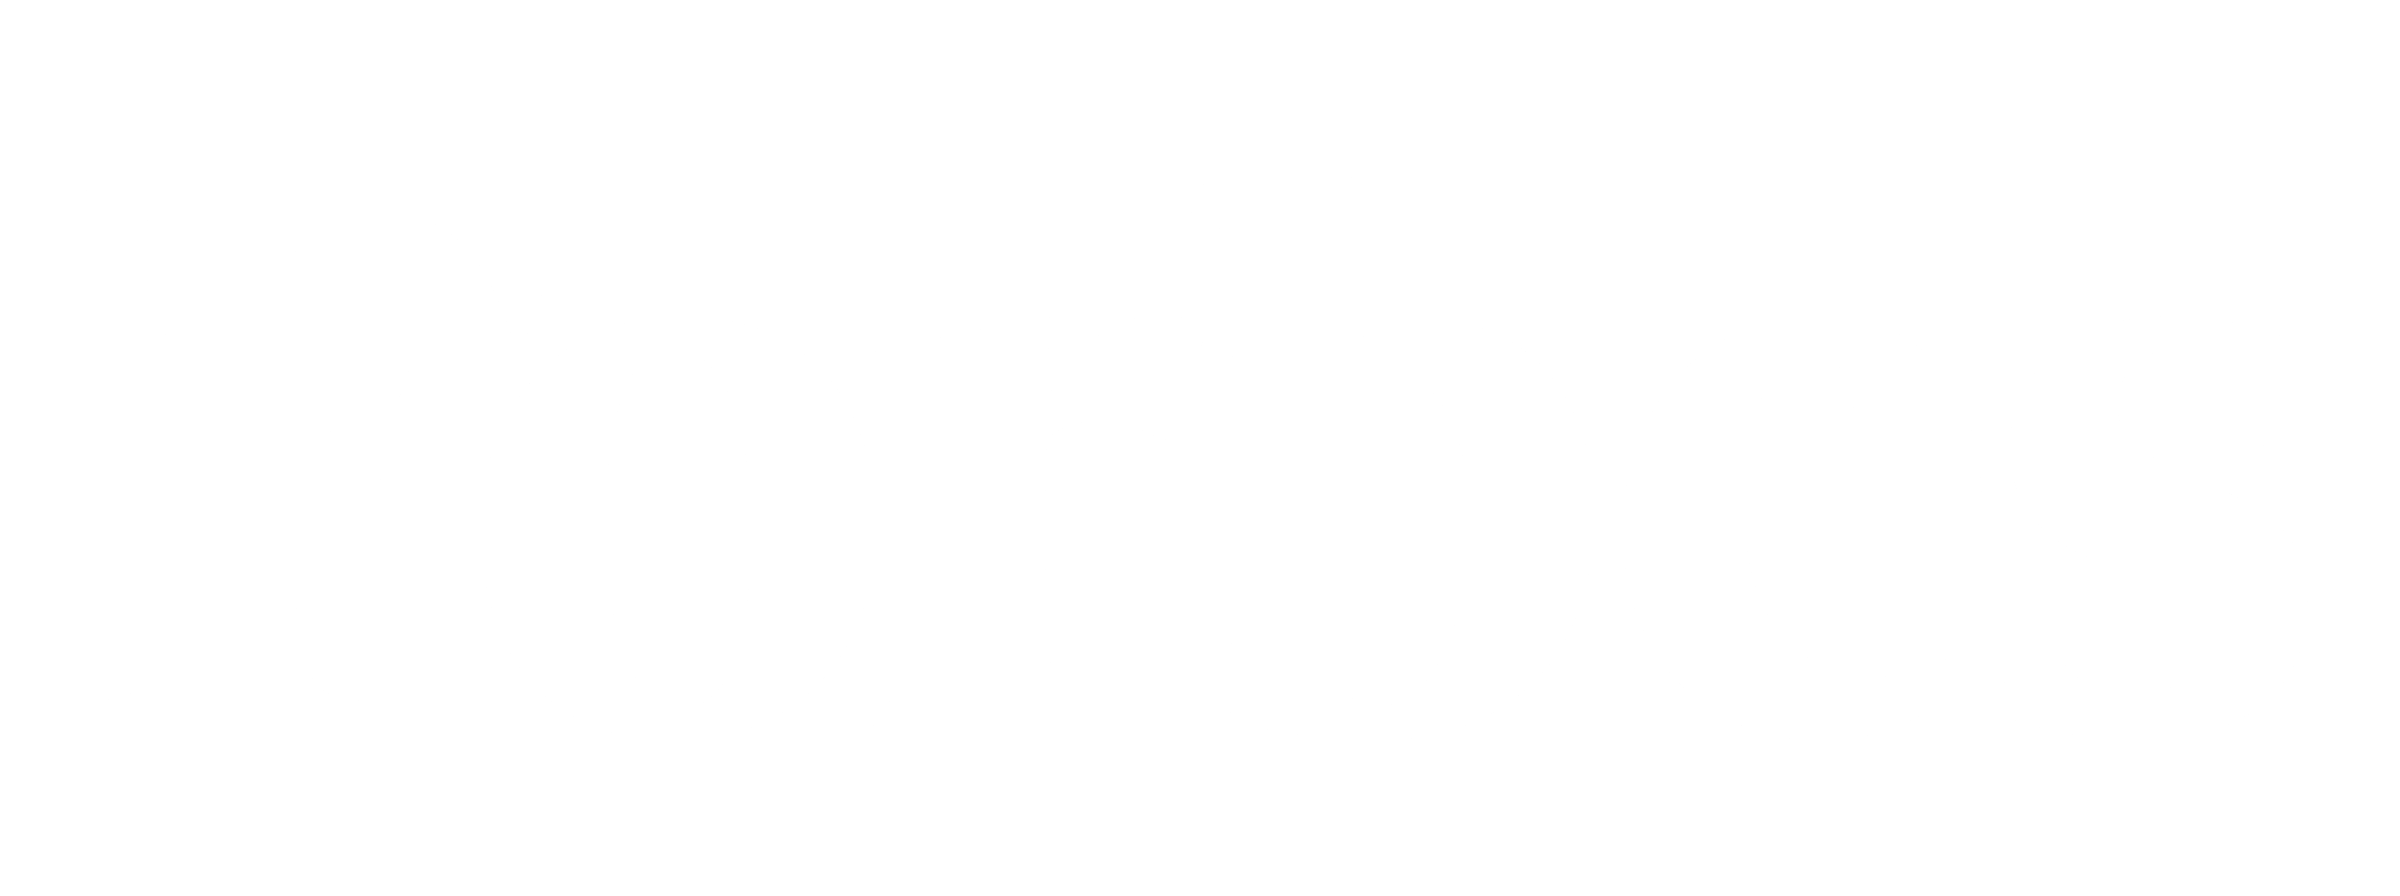 forbes-logo-black-and-white-1